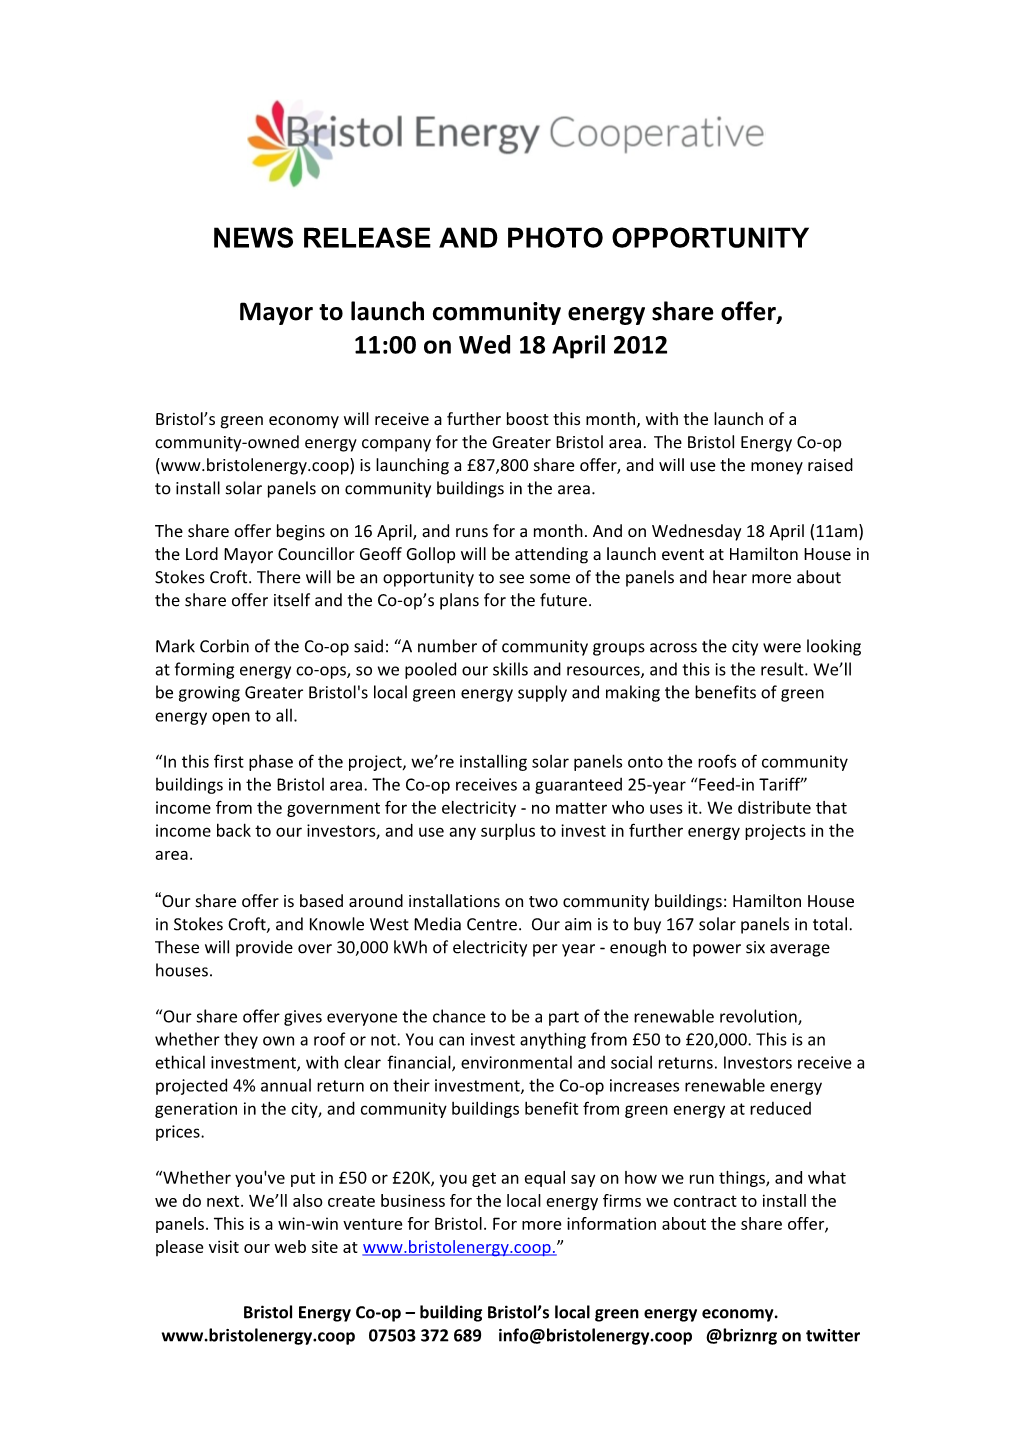 News Release and Photo Opportunity